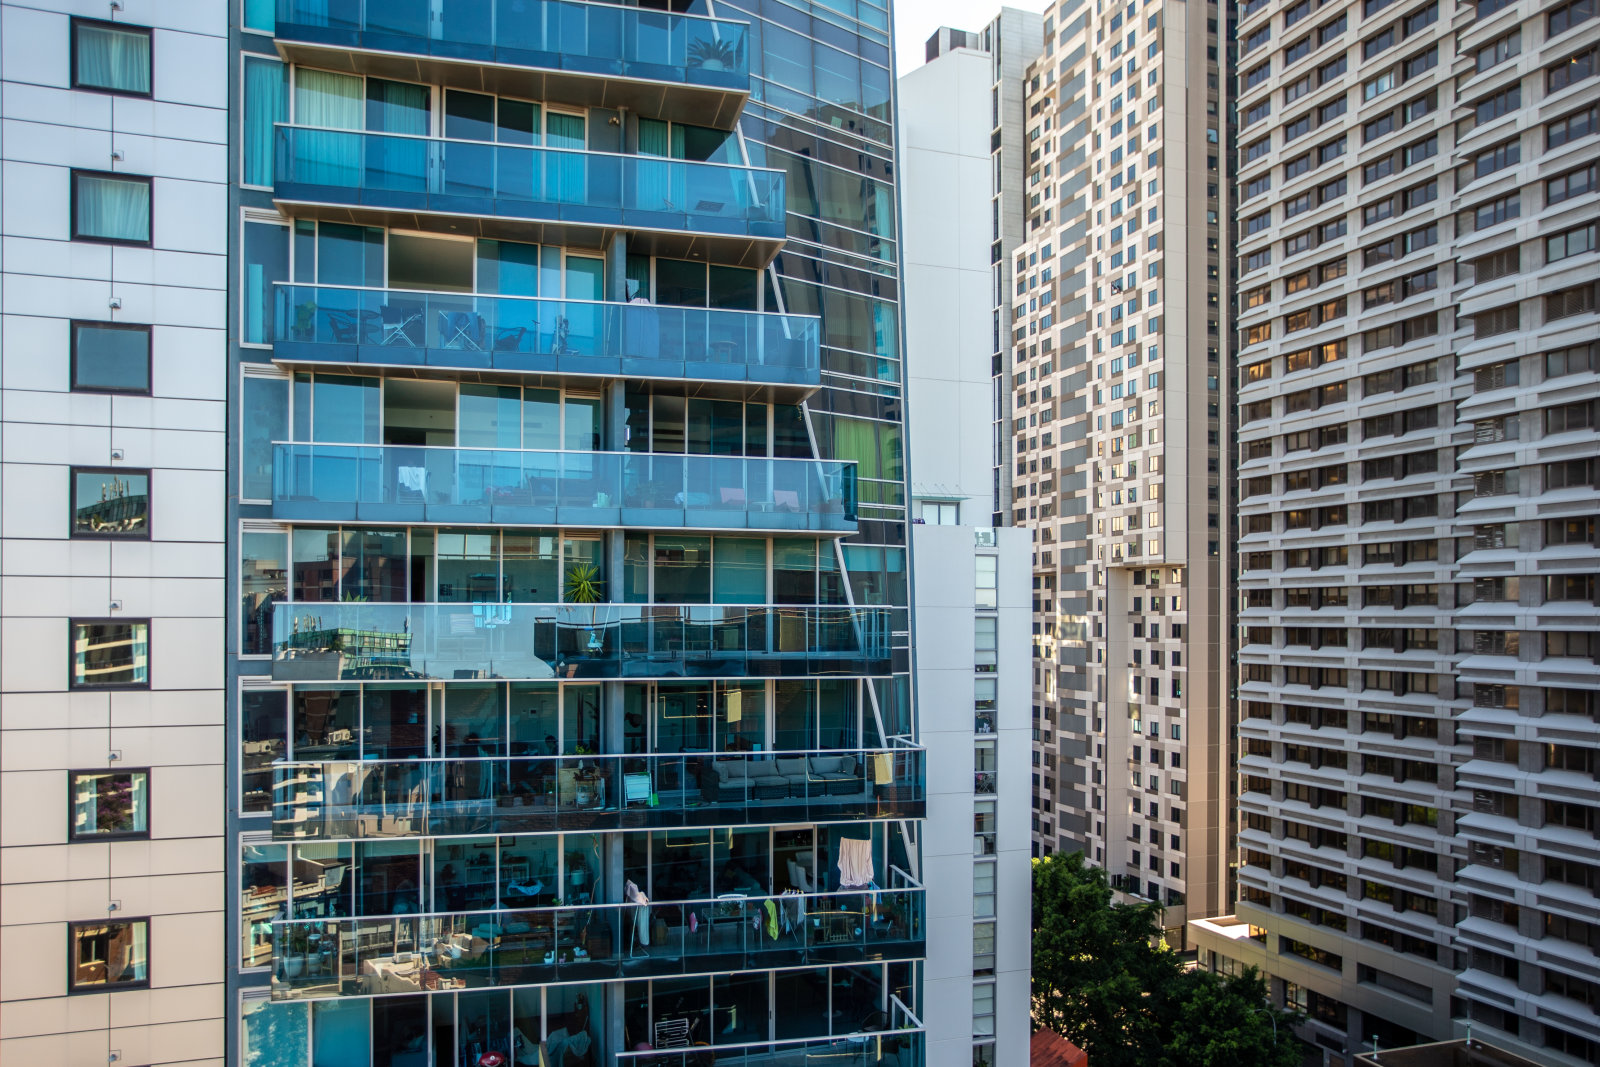 Wentworth Towers
17-25 Wentworth Avenue, Sydney - 11th April 2022. The Smart Green Apartments programme is a scheme designed by the City of Sydney to improve the cost-effectiveness and environmental performance of apartment buildings. Photo by Katherine Griffiths